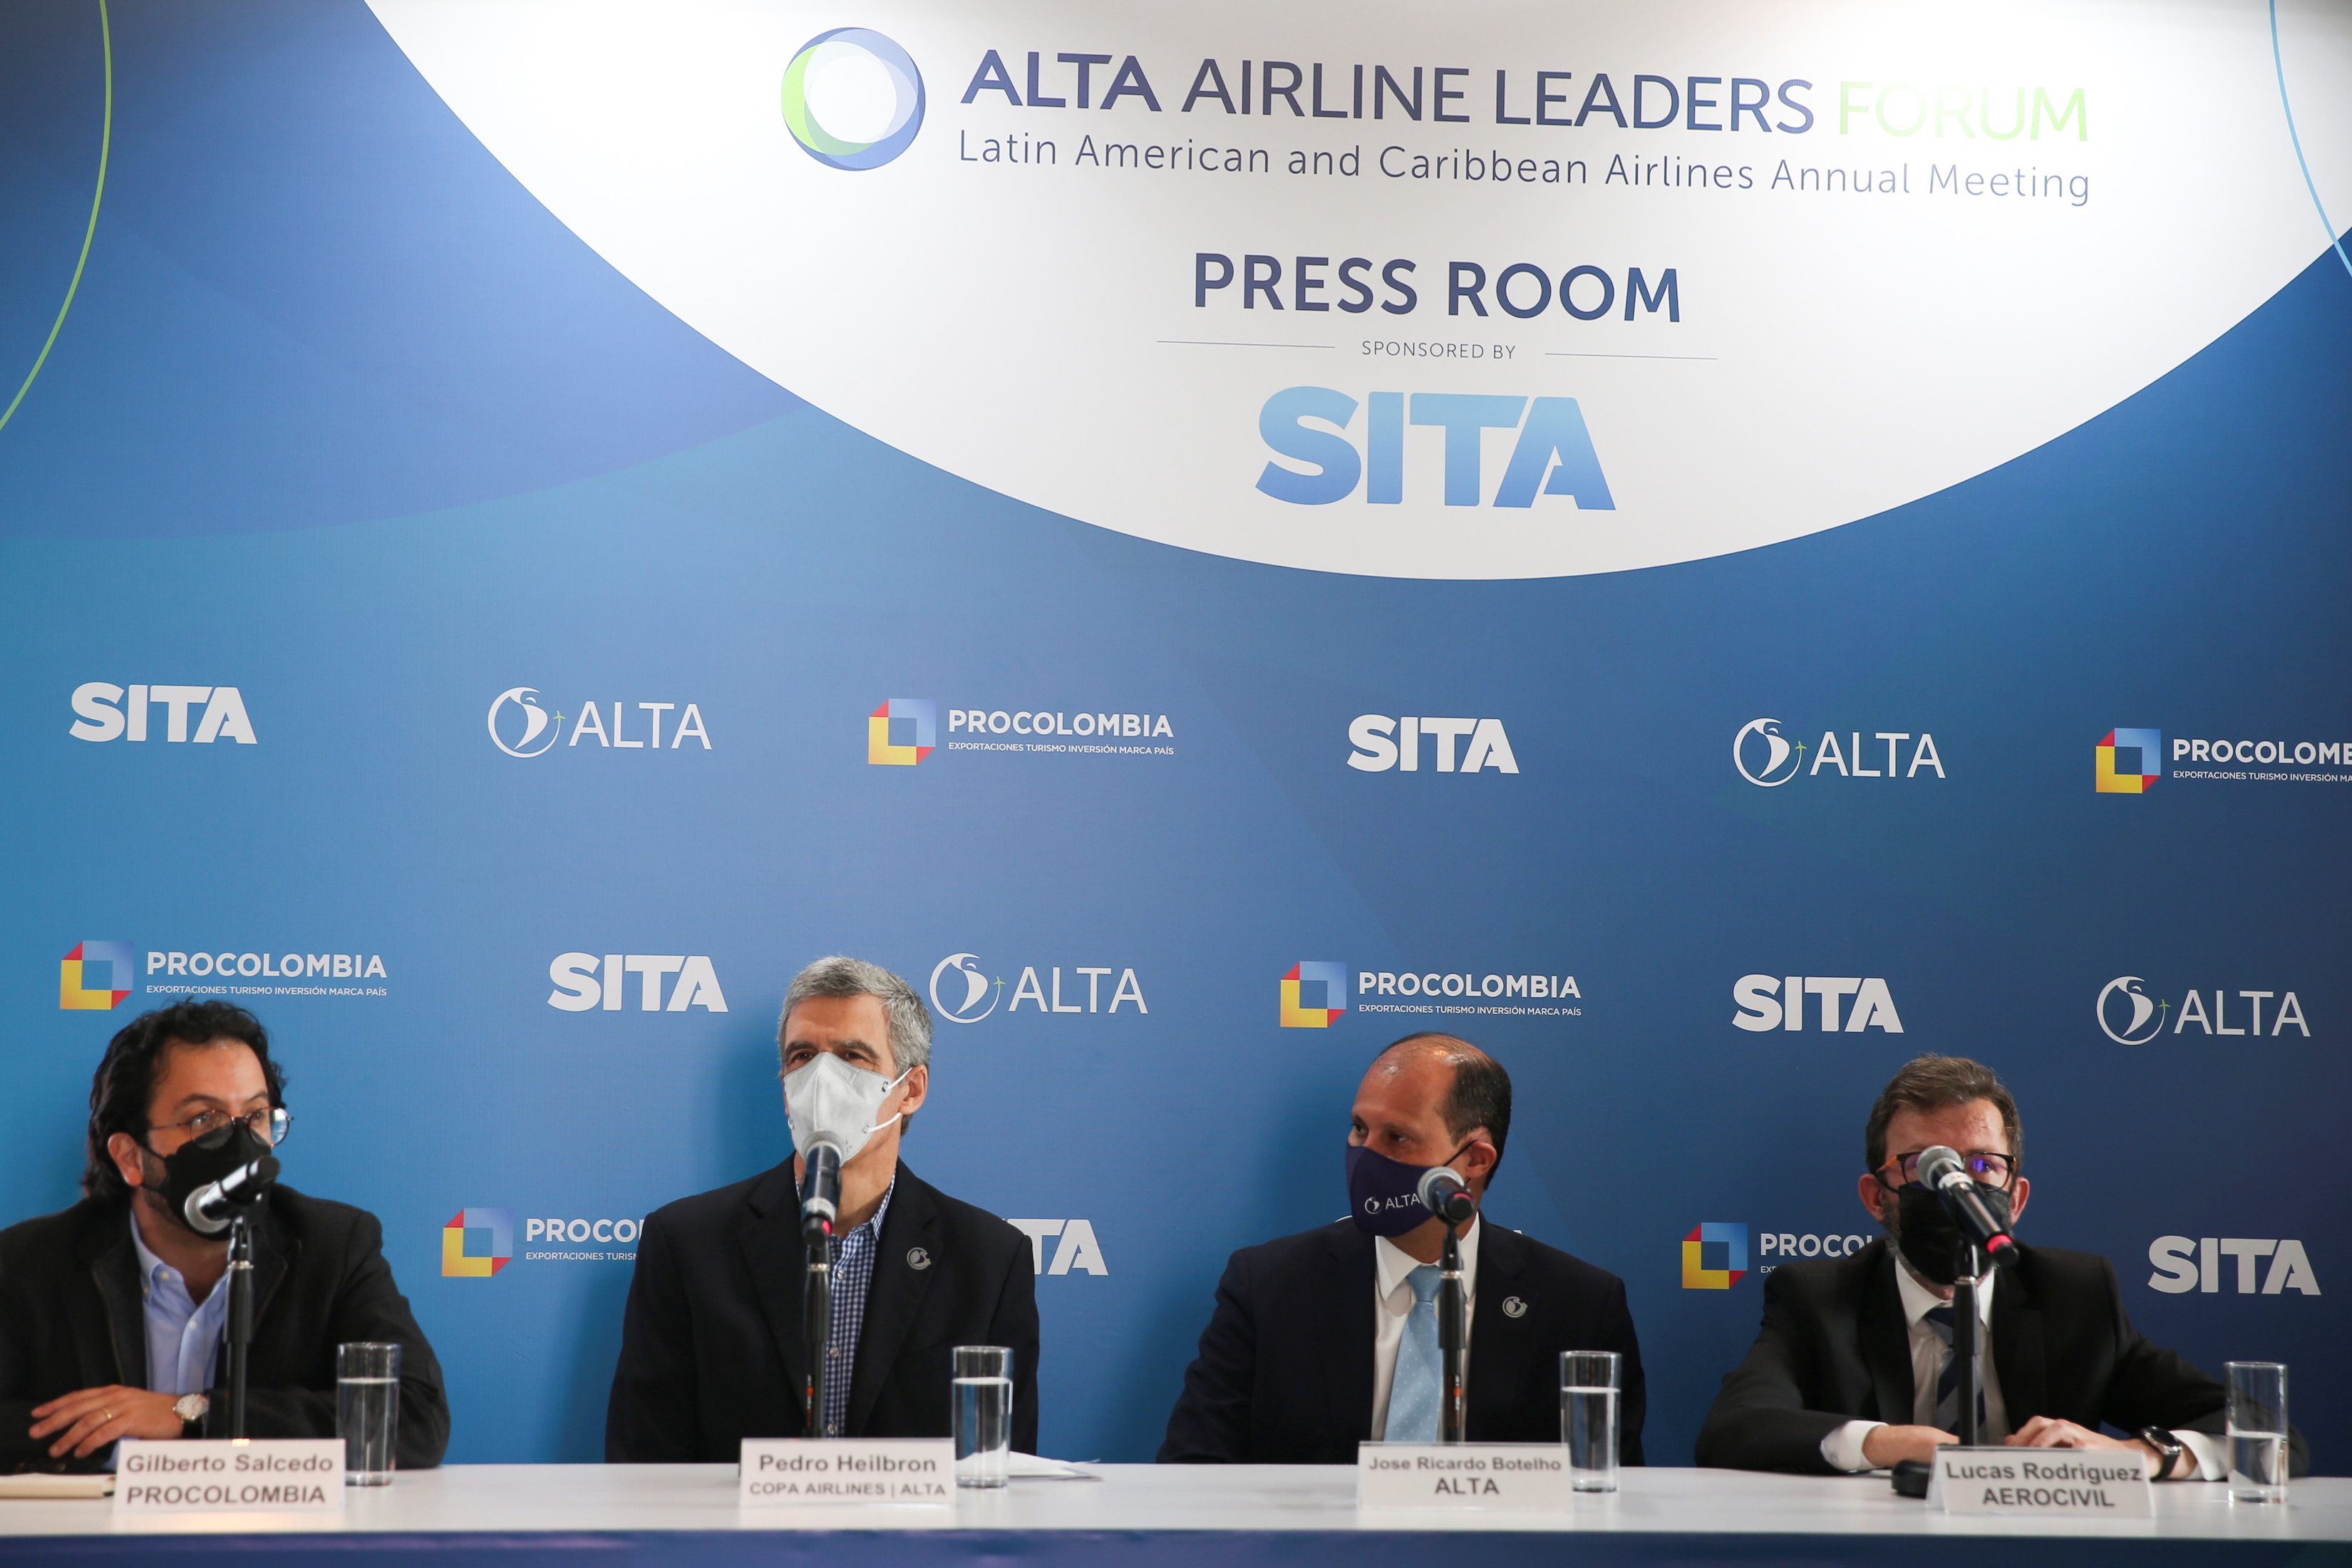 Standardization of travel rules key for Latin America airlines’ recovery